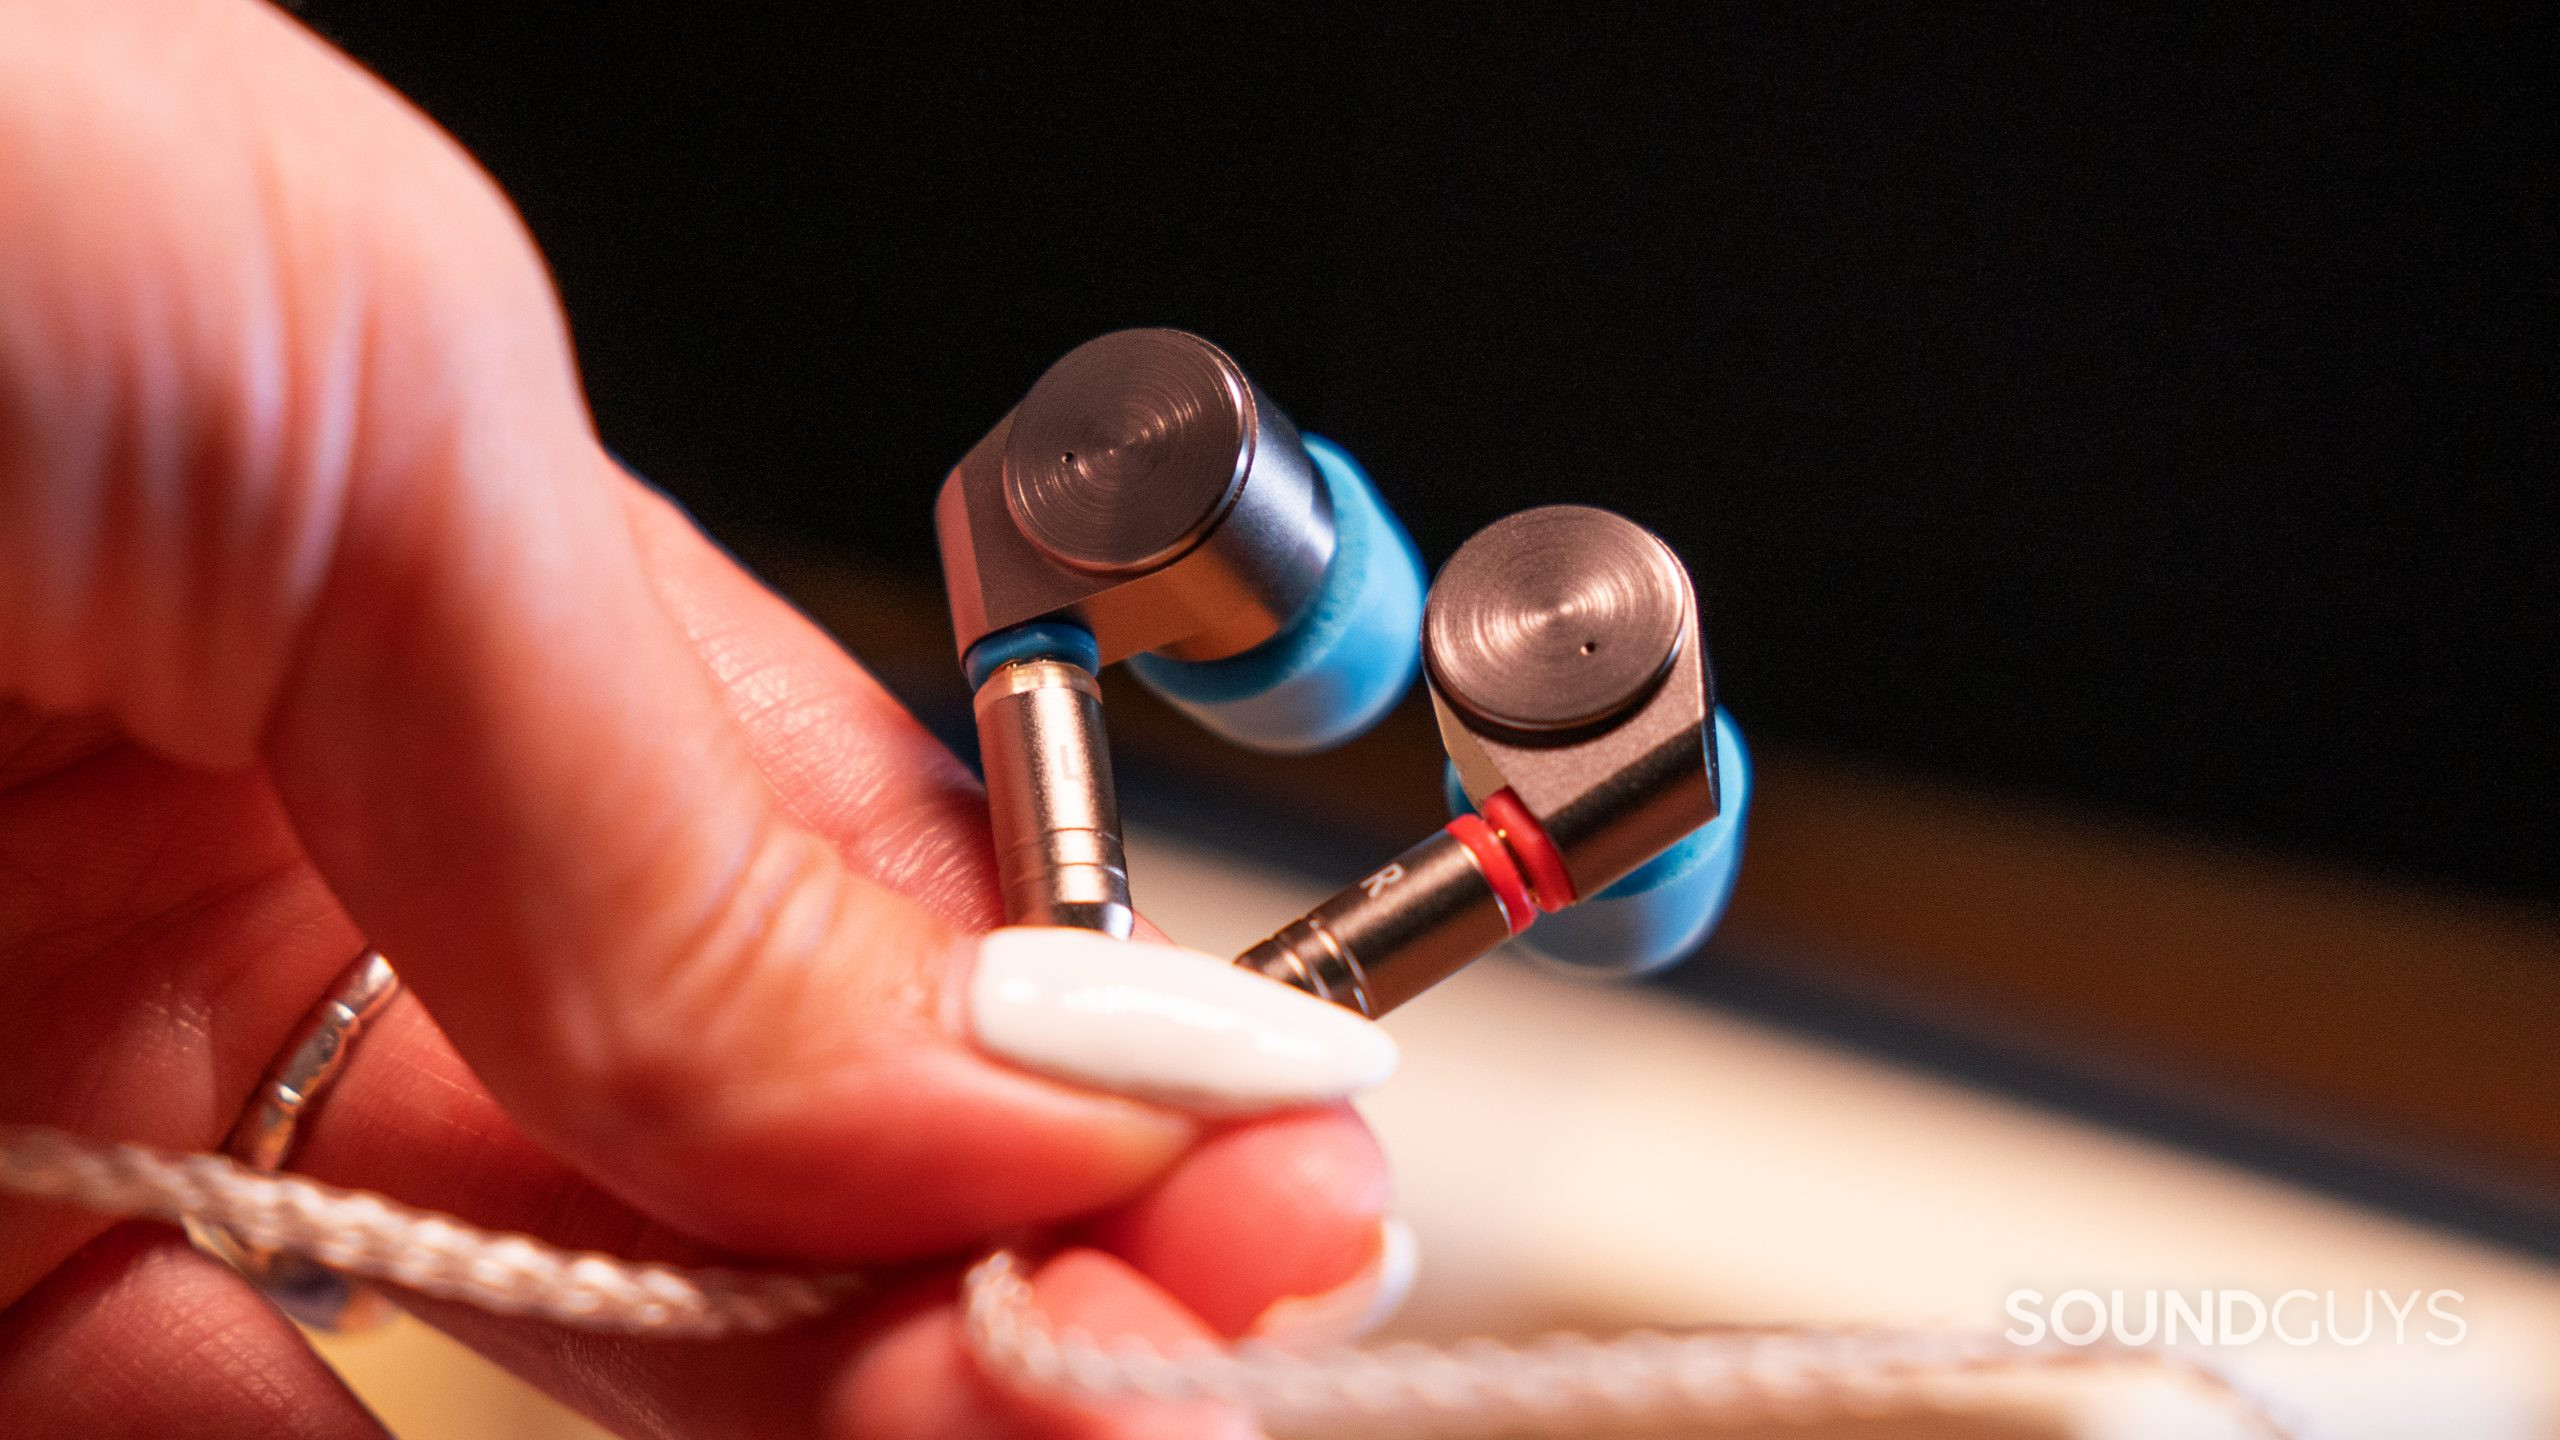 A woman's hand with long nails holds the Linsoul TIN Audio T2 buds at a close up.